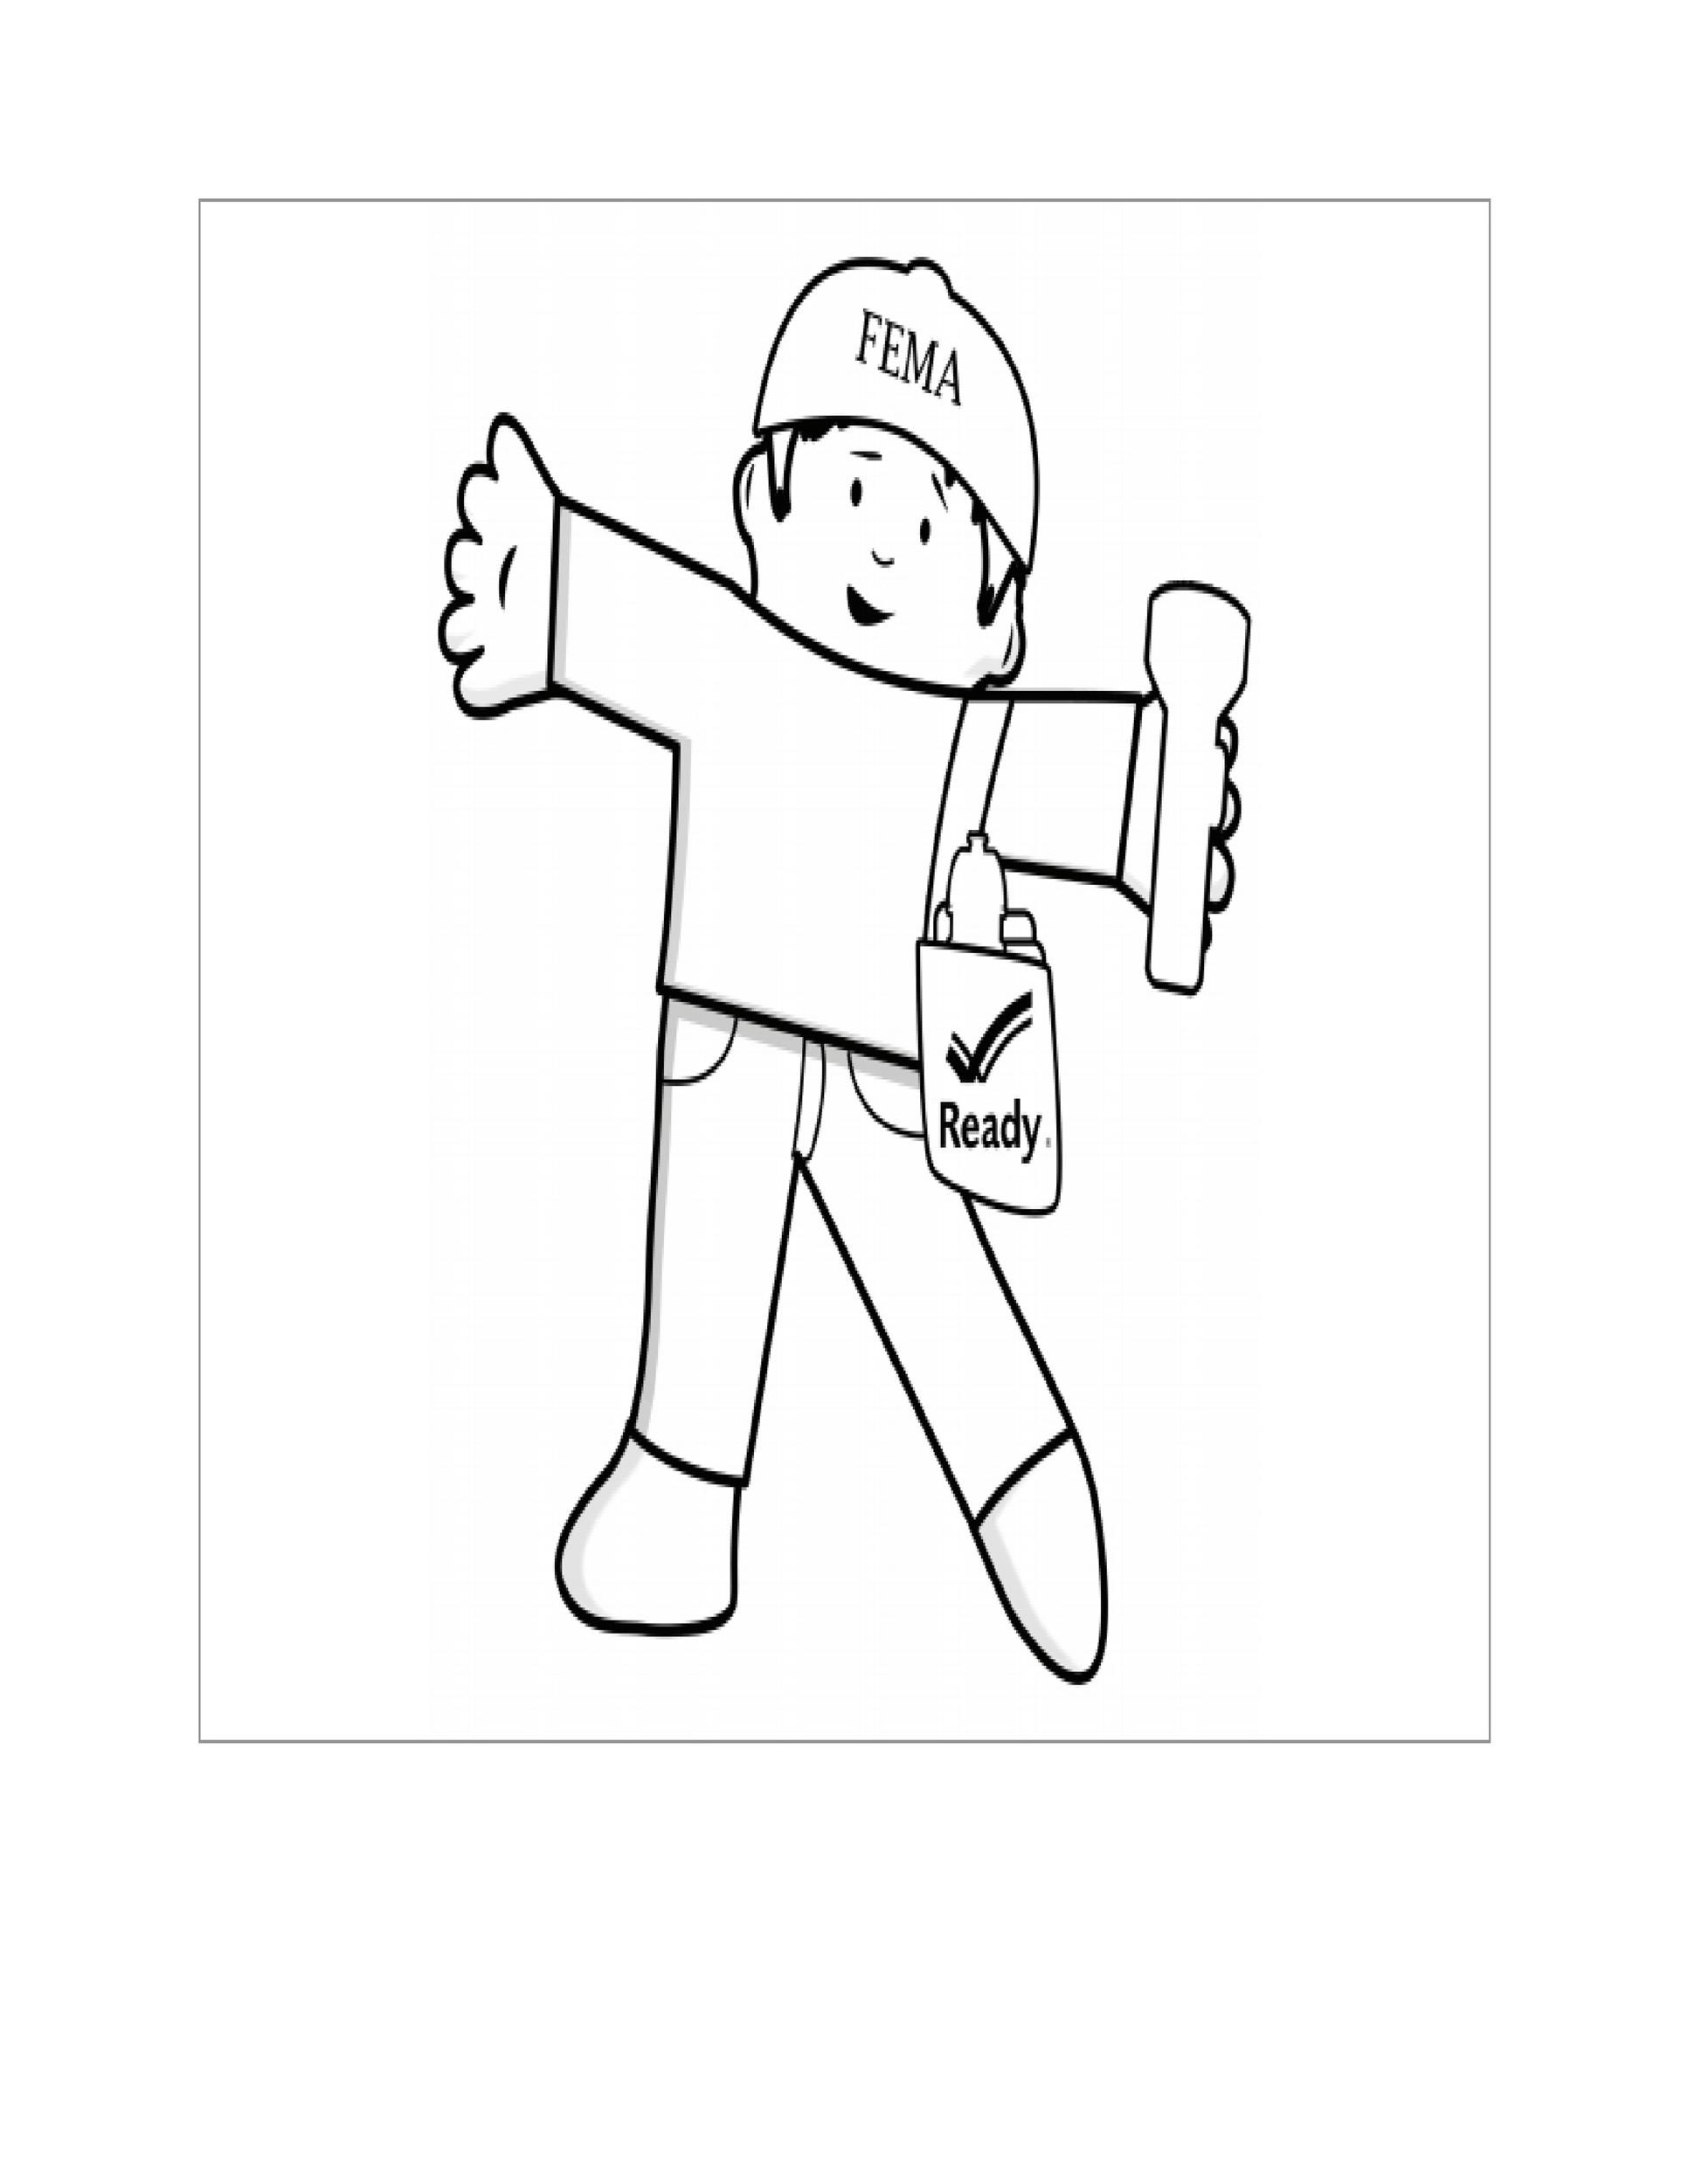 37-flat-stanley-templates-letter-examples-templatelab